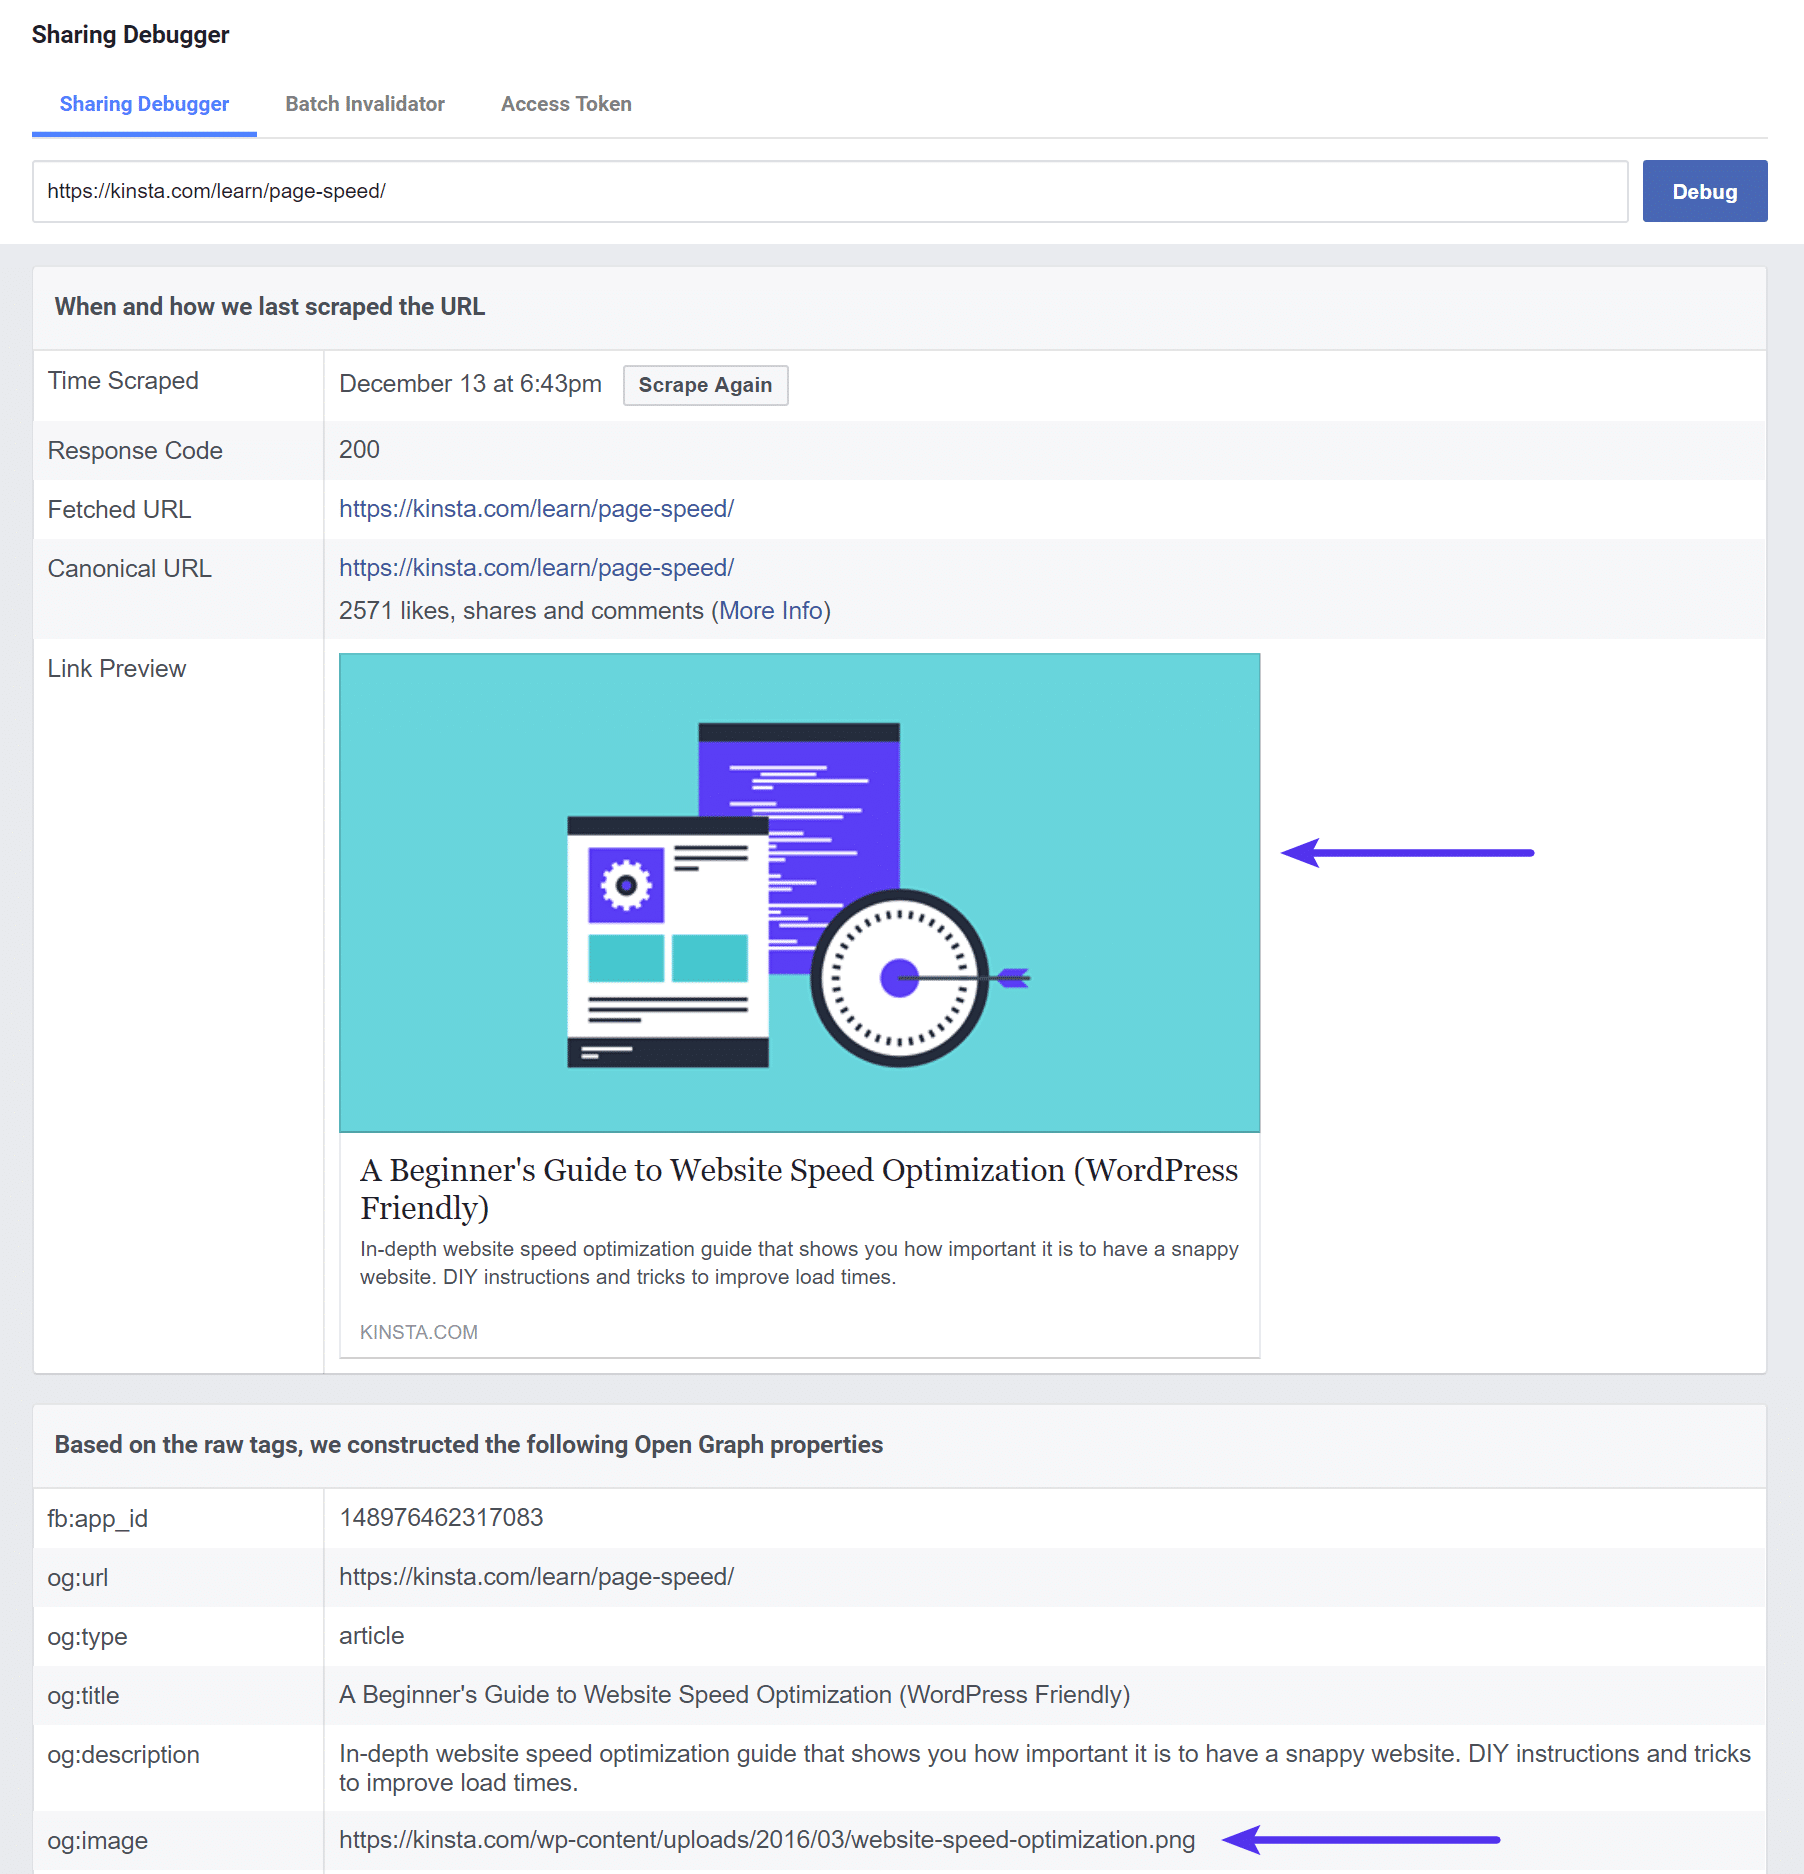 Old image and URL showing in Facebook Debugger